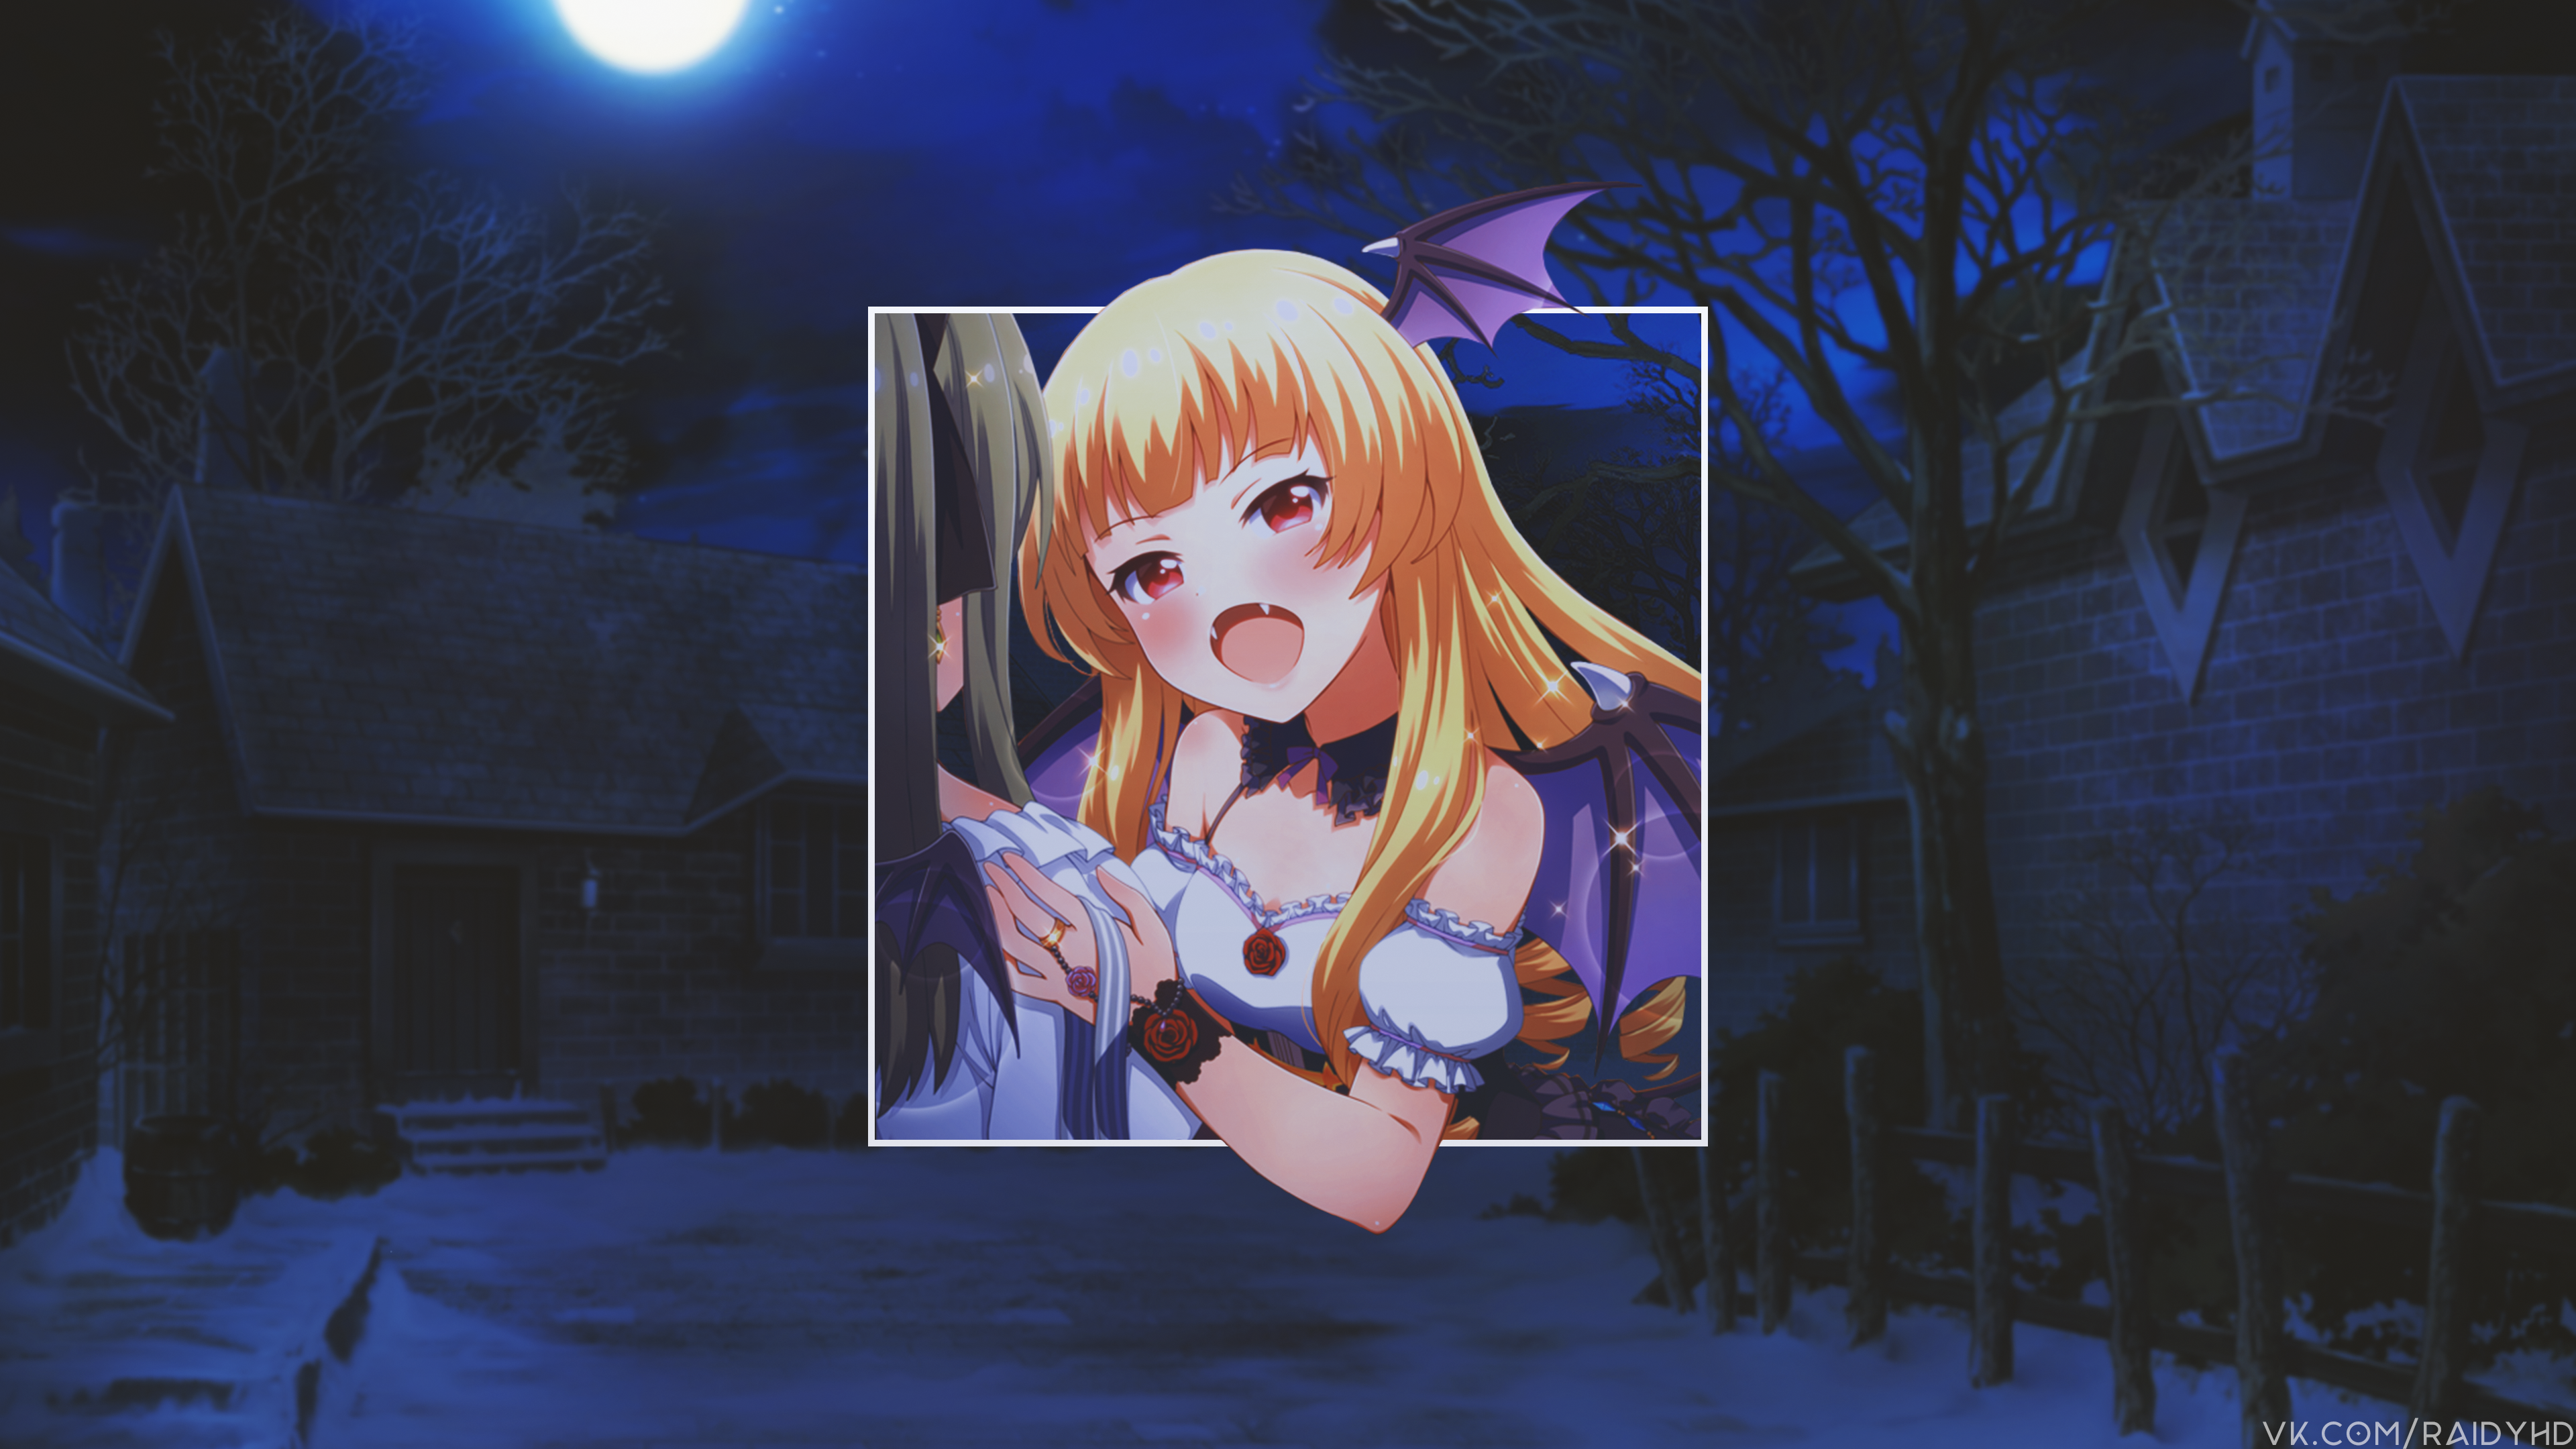 Anime 3840x2160 anime anime girls picture-in-picture vampires open mouth